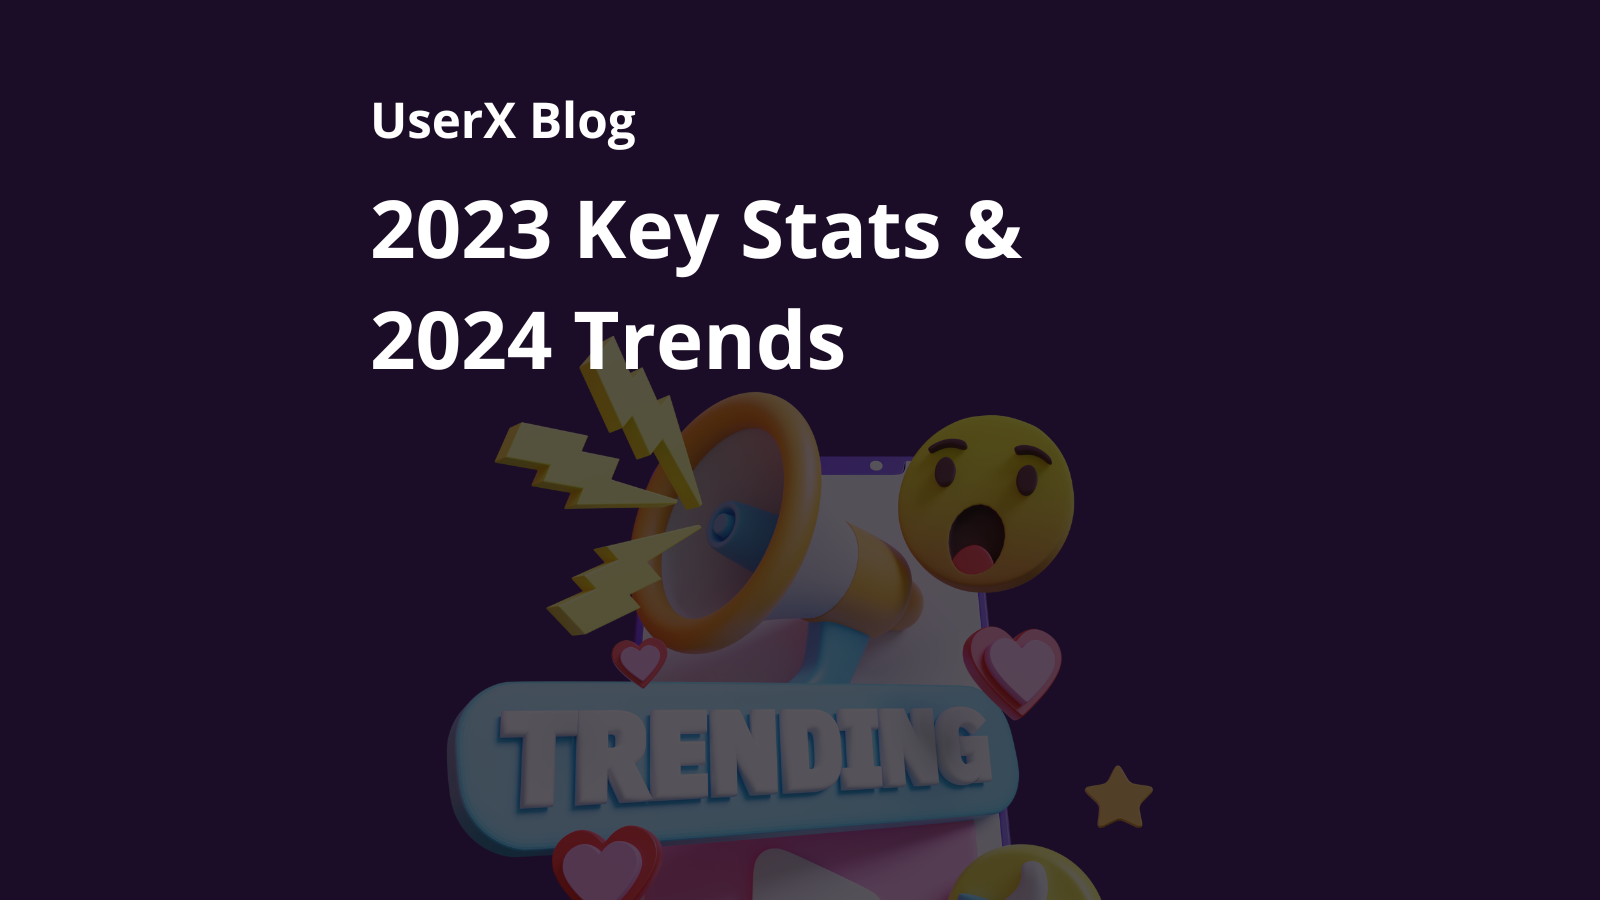 Statistics: Up-to-Date Numbers Relevant for 2023-2024